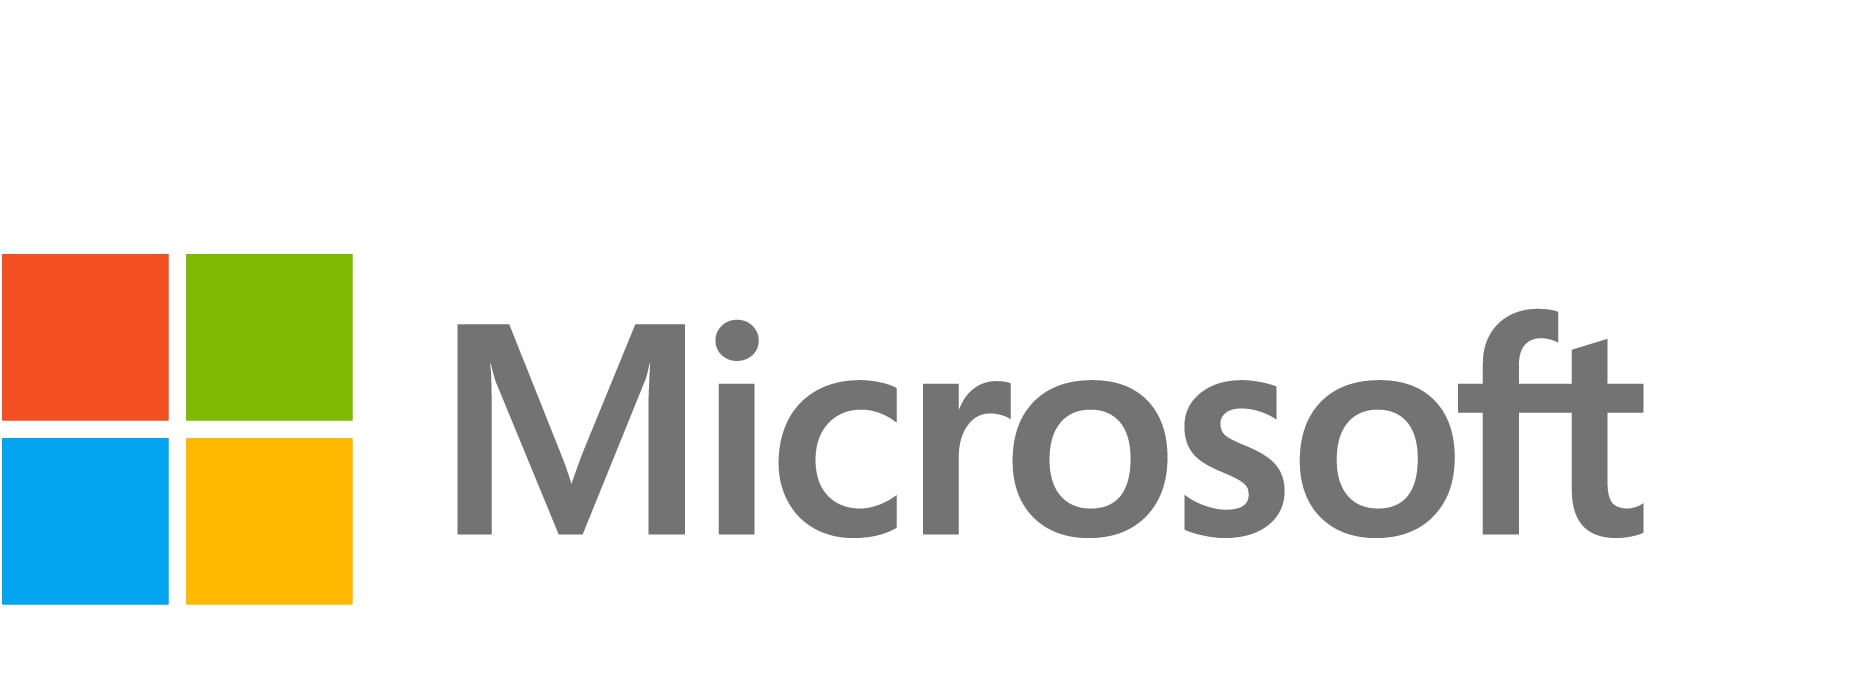 Microsoft Windows Rights Management Services - software assurance - 1 user